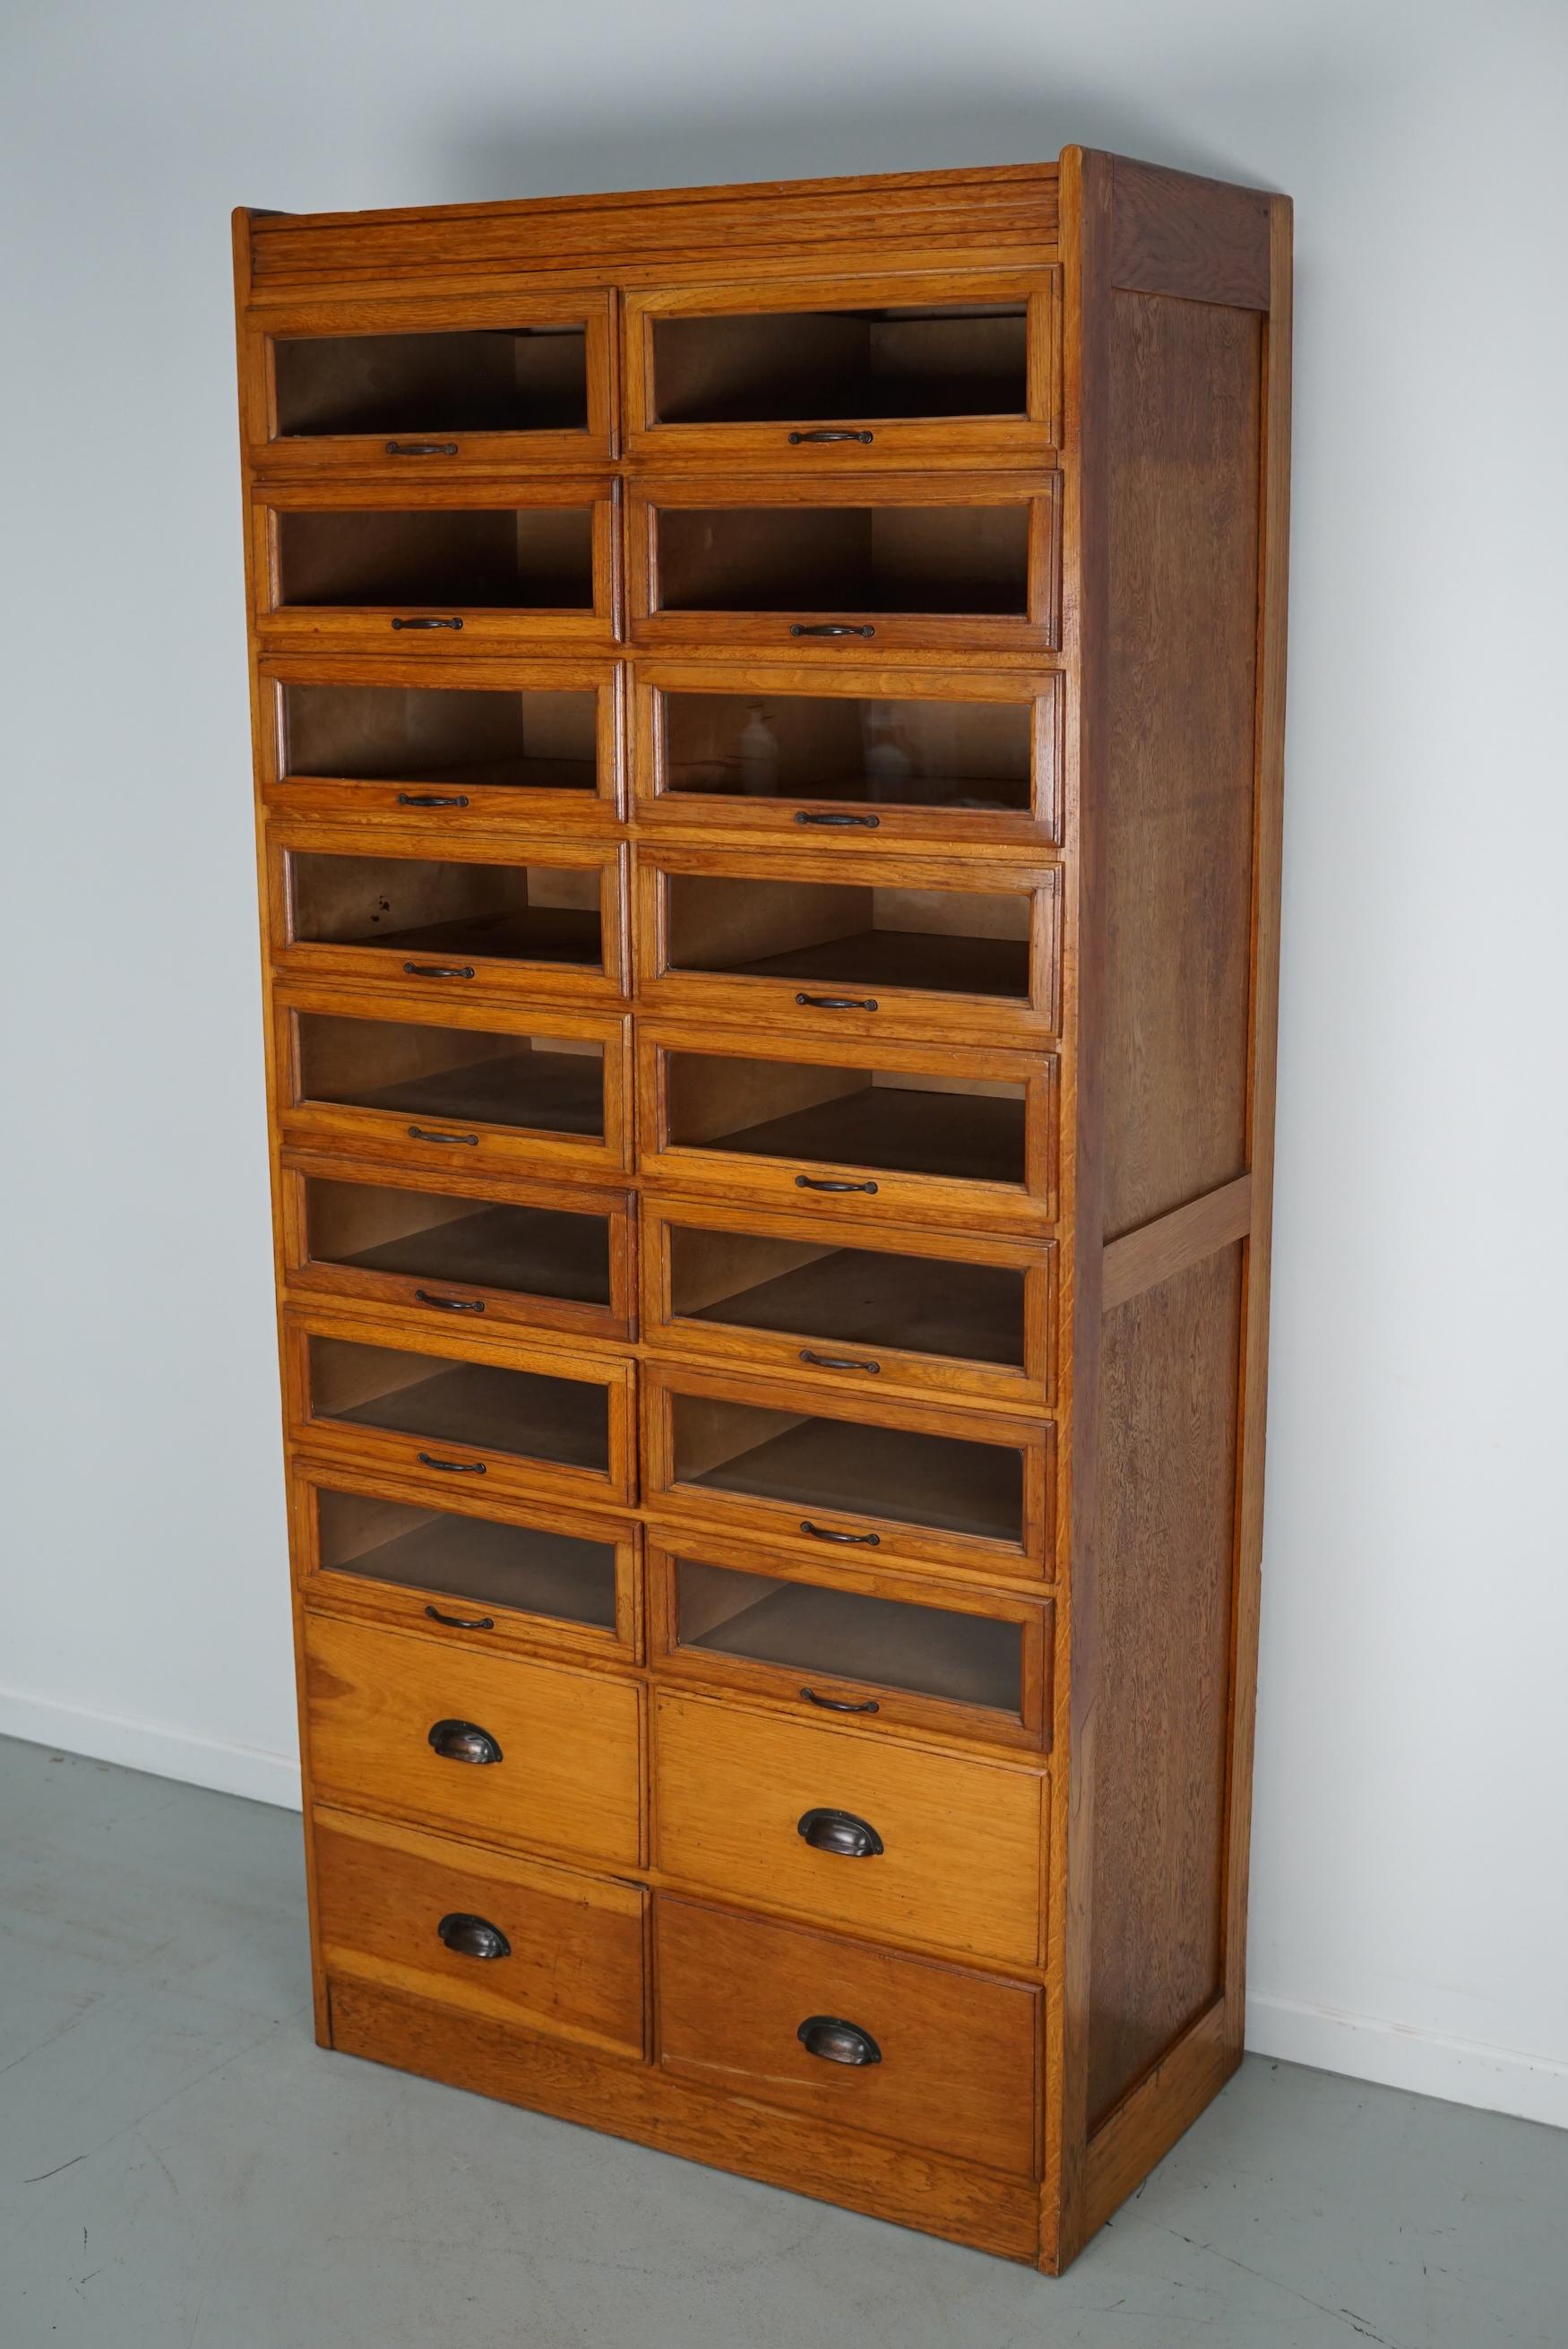 This vintage oak haberdashery cabinet dates from the 1930s and was made in England. It features a solid wooden frame with glass fronted drawers and four large closed drawers at the bottom. The interior dimensions of the drawers are: DWH 41 x 40 x 13